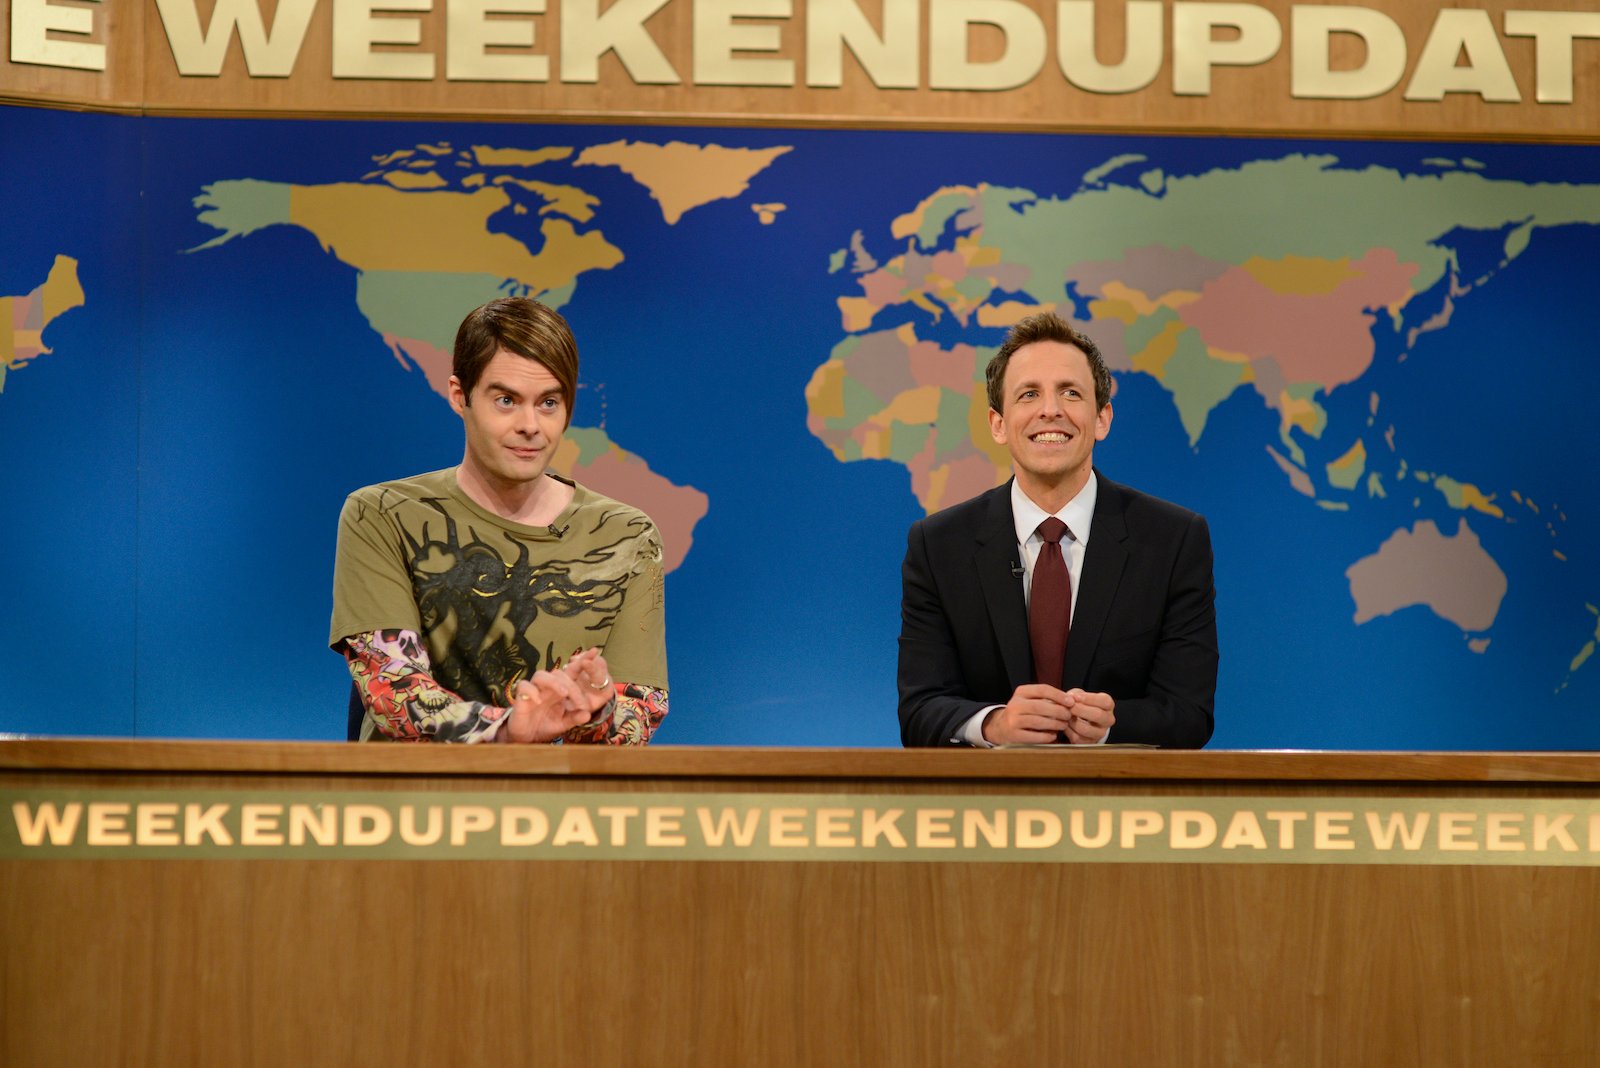 Emmy nominated Bill Hader sits in the Stefon character next to Seth Meyers at the SNL Weekend Update desk  